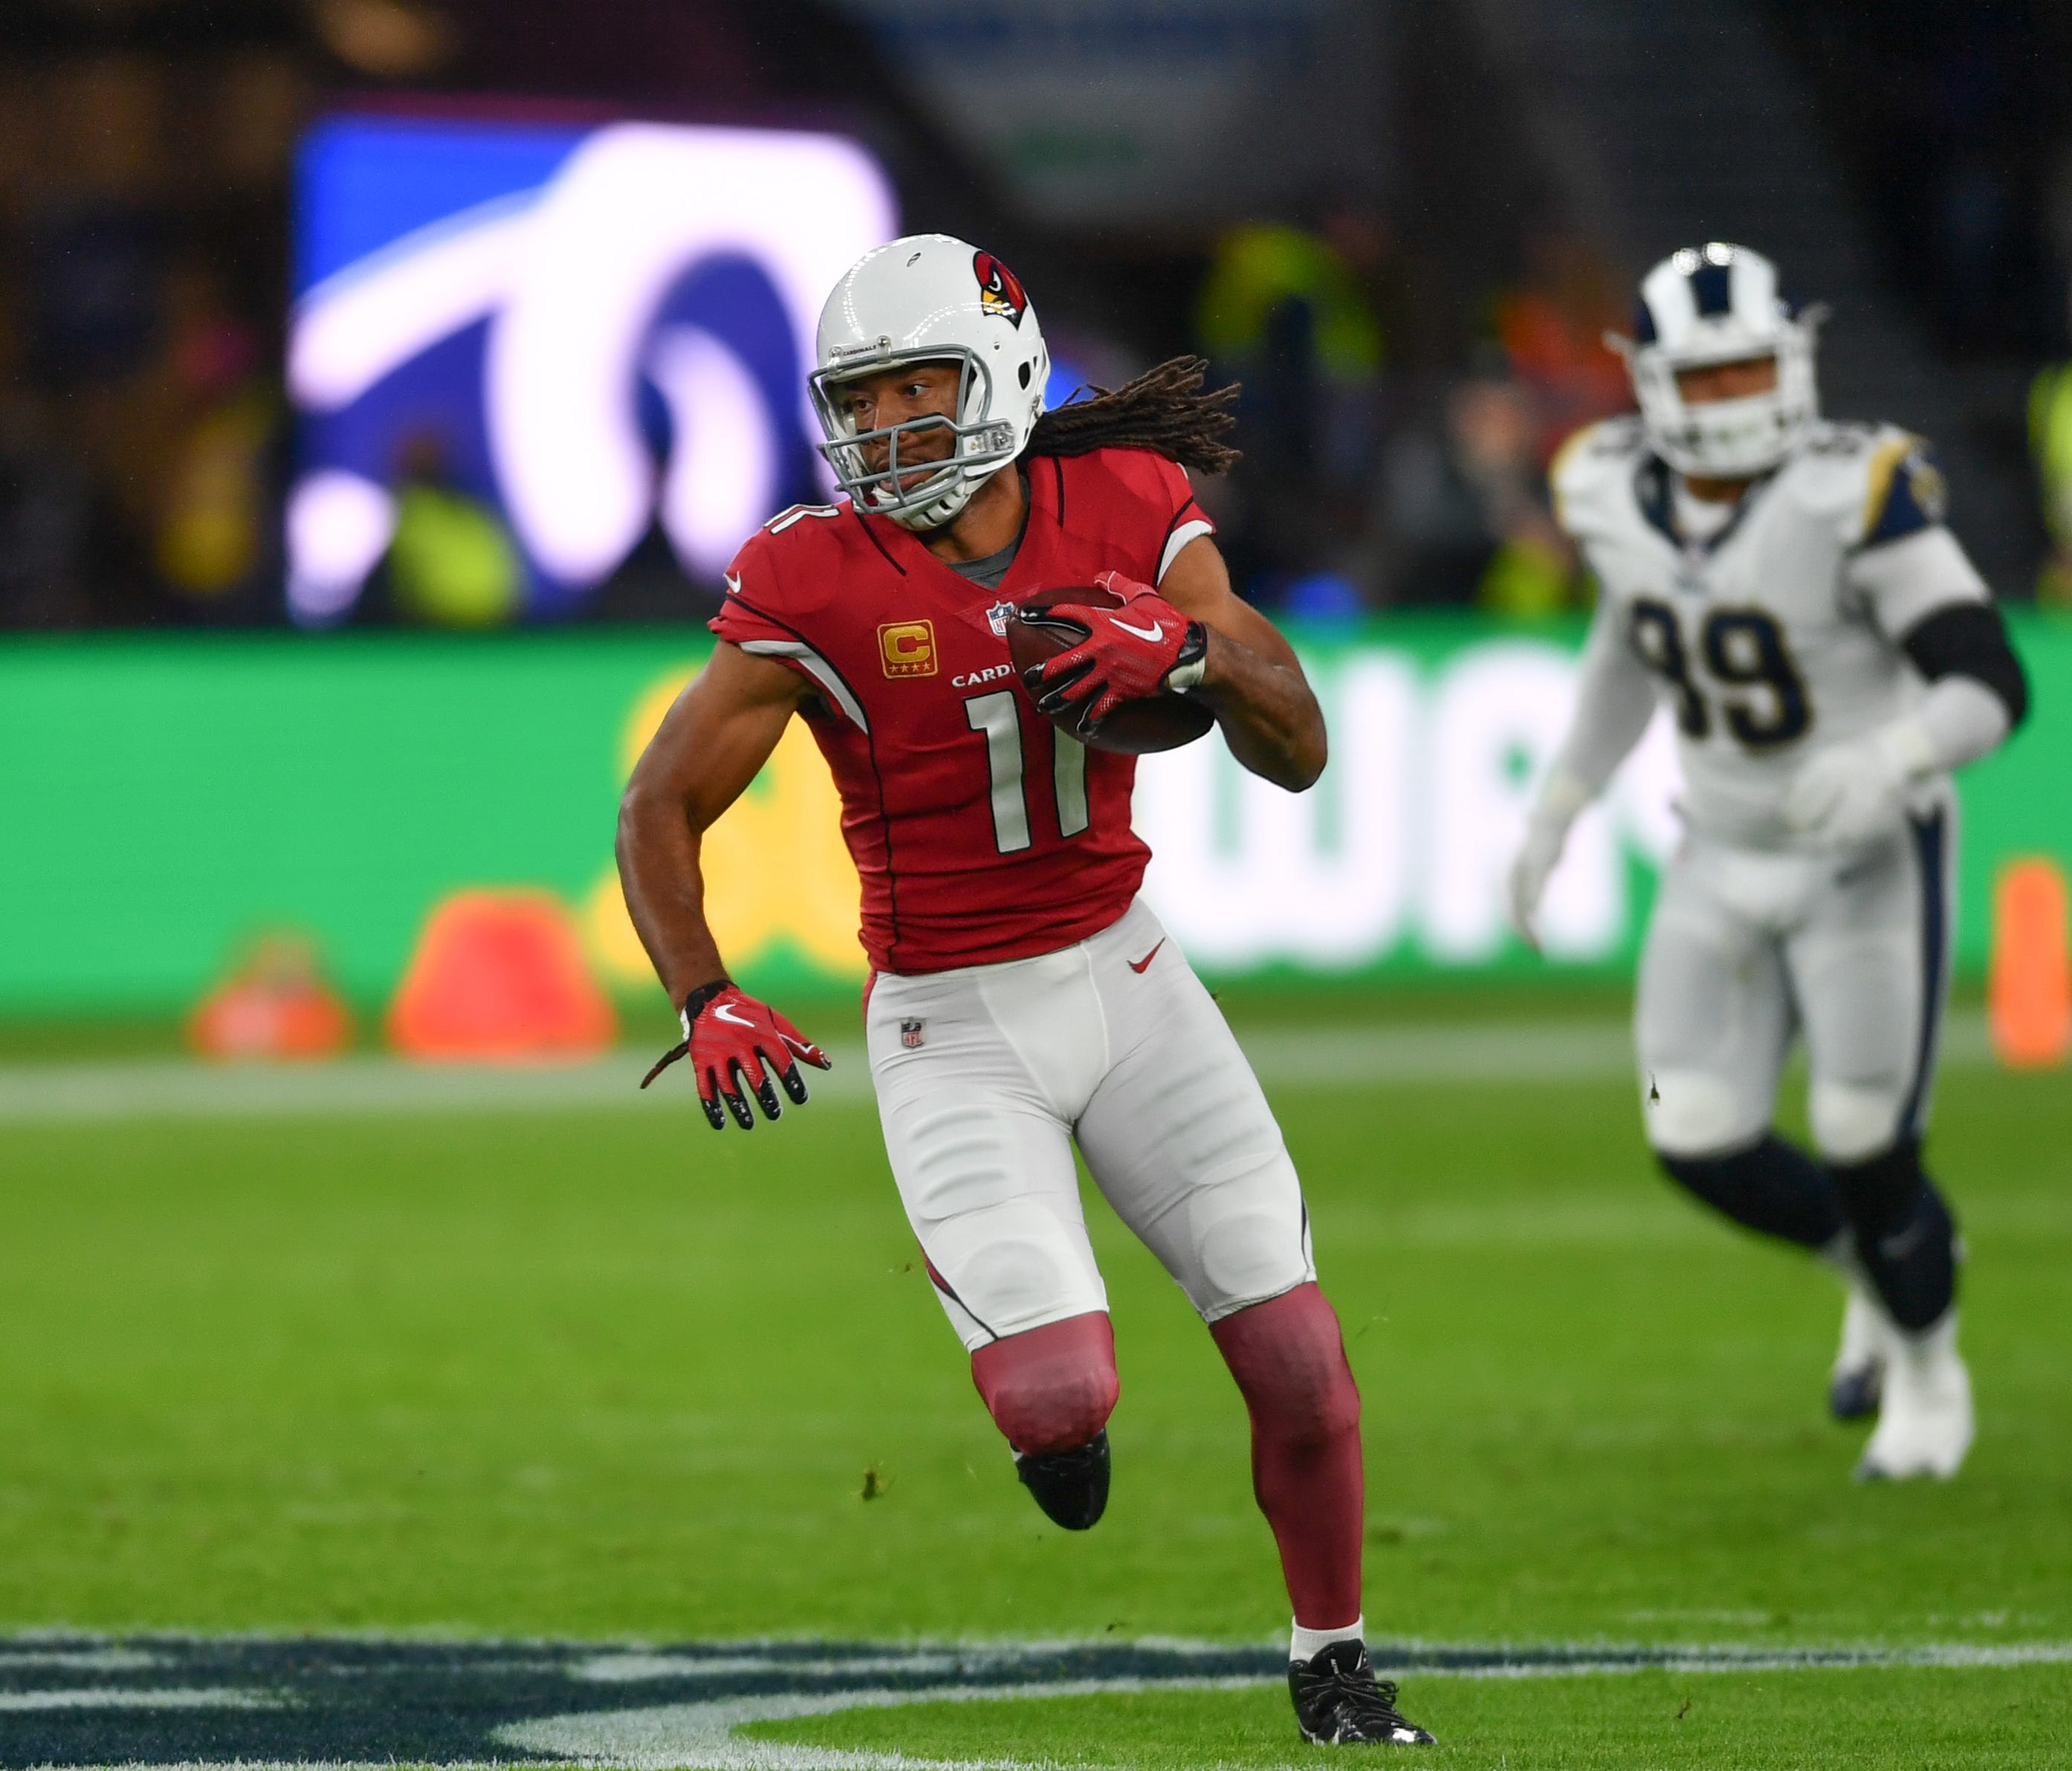 Arizona Cardinals wide receiver Larry Fitzgerald (11) makes a run in the first quarter during the NFL International Series game against the Arizona Cardinals at Twickenham Stadium.